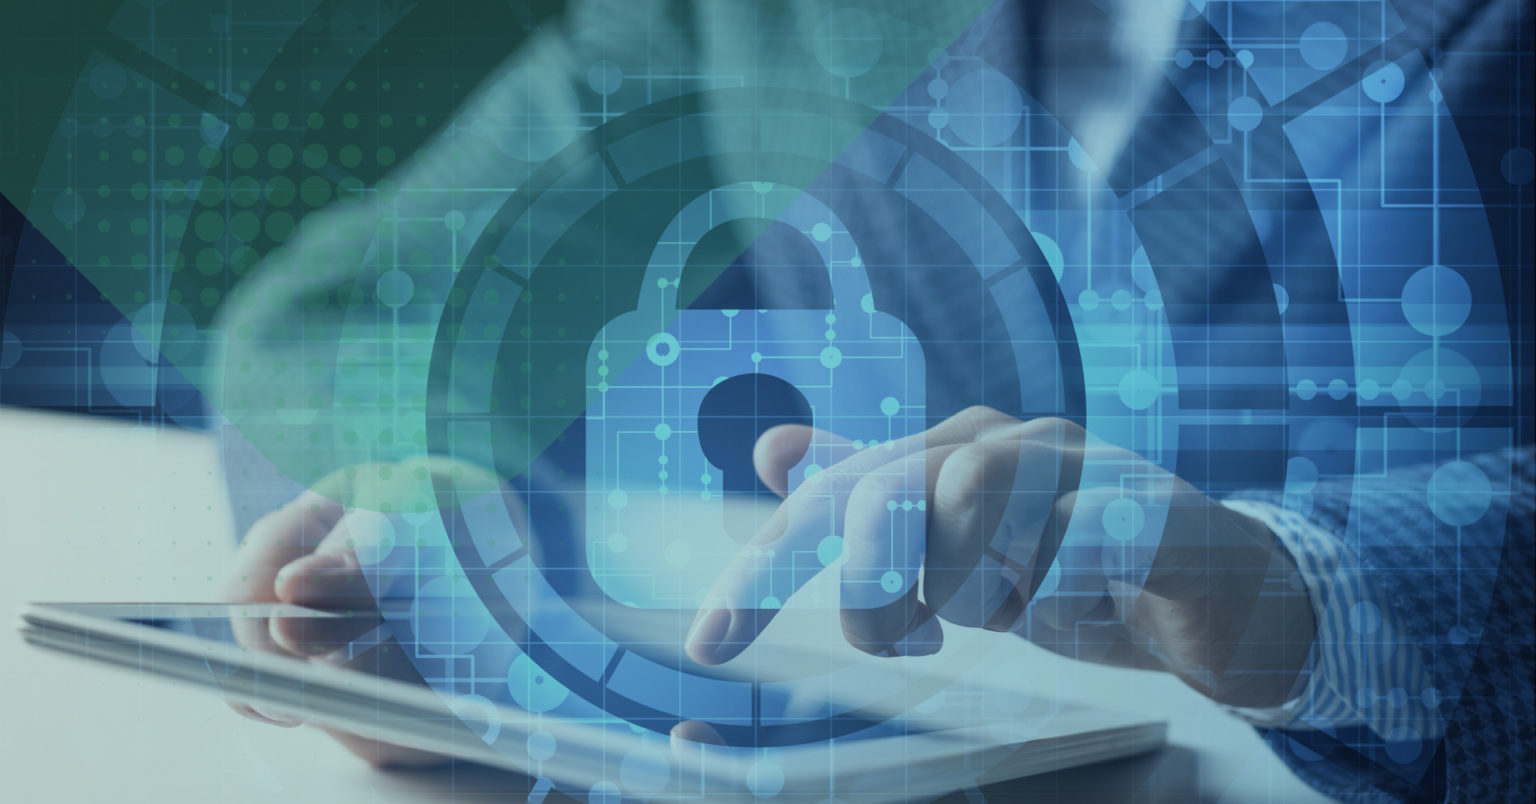 Ics Ot Cyber Security Fundamentals 5 Ways To Protect Your Company